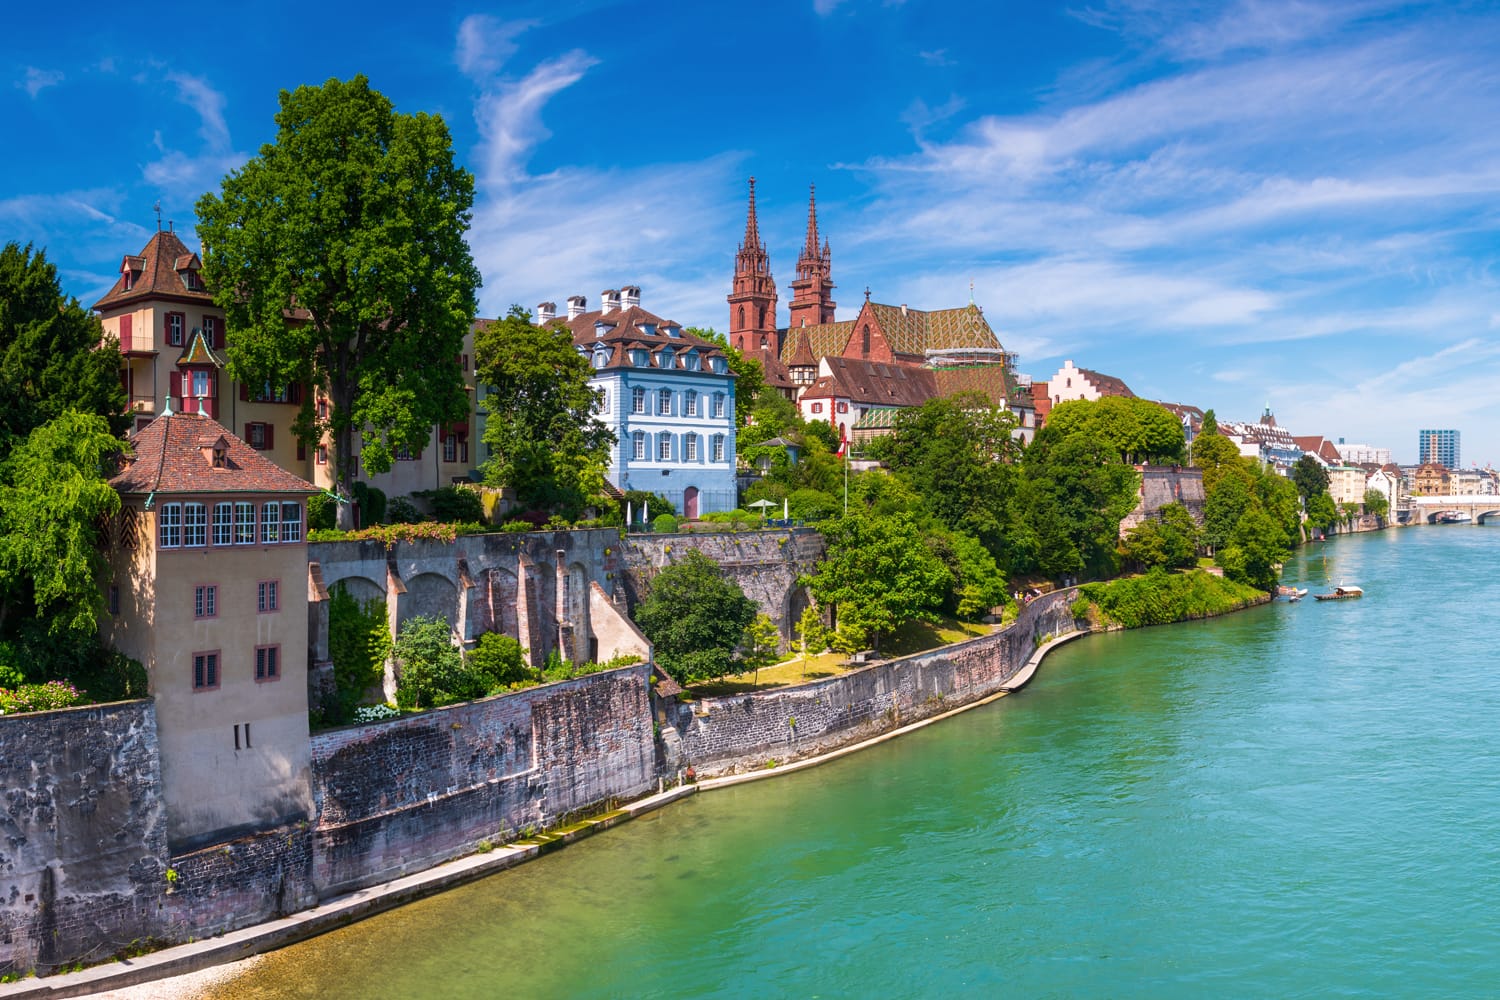 View of the Old Town of Basel with red stone Munster cathedral and the Rhine river, Switzerland.